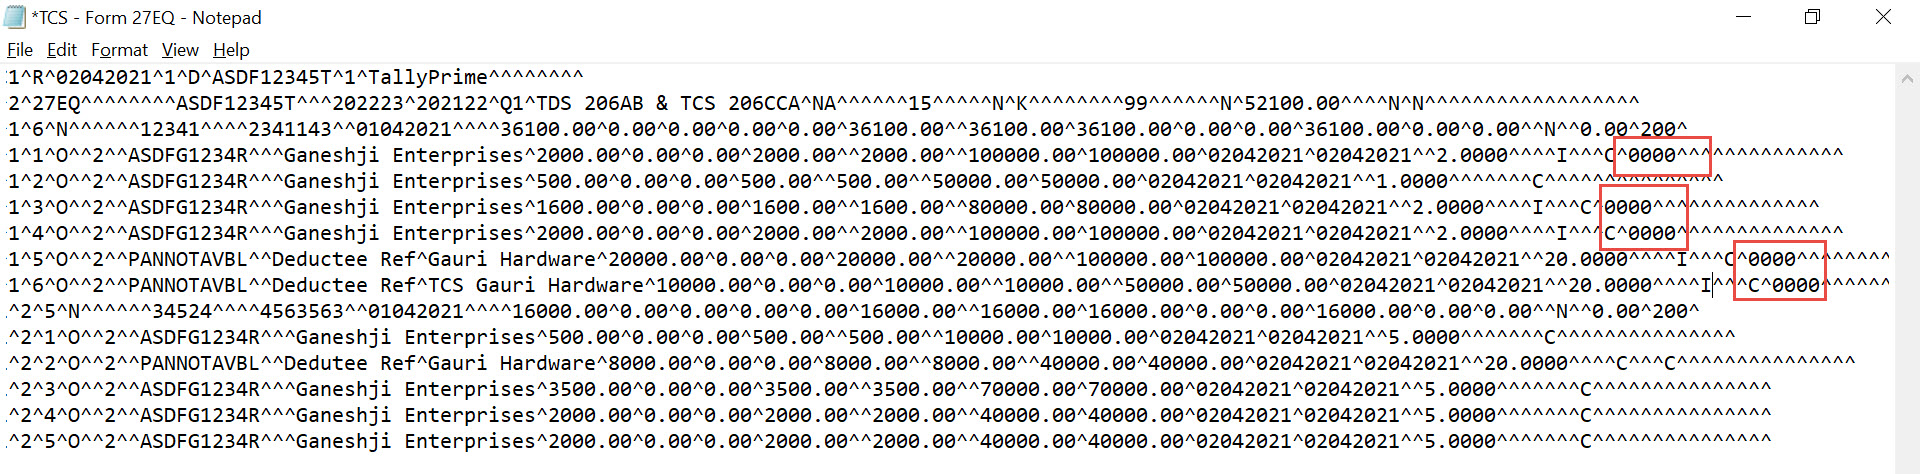 Before Removing 0000 from the Row in the Text File.